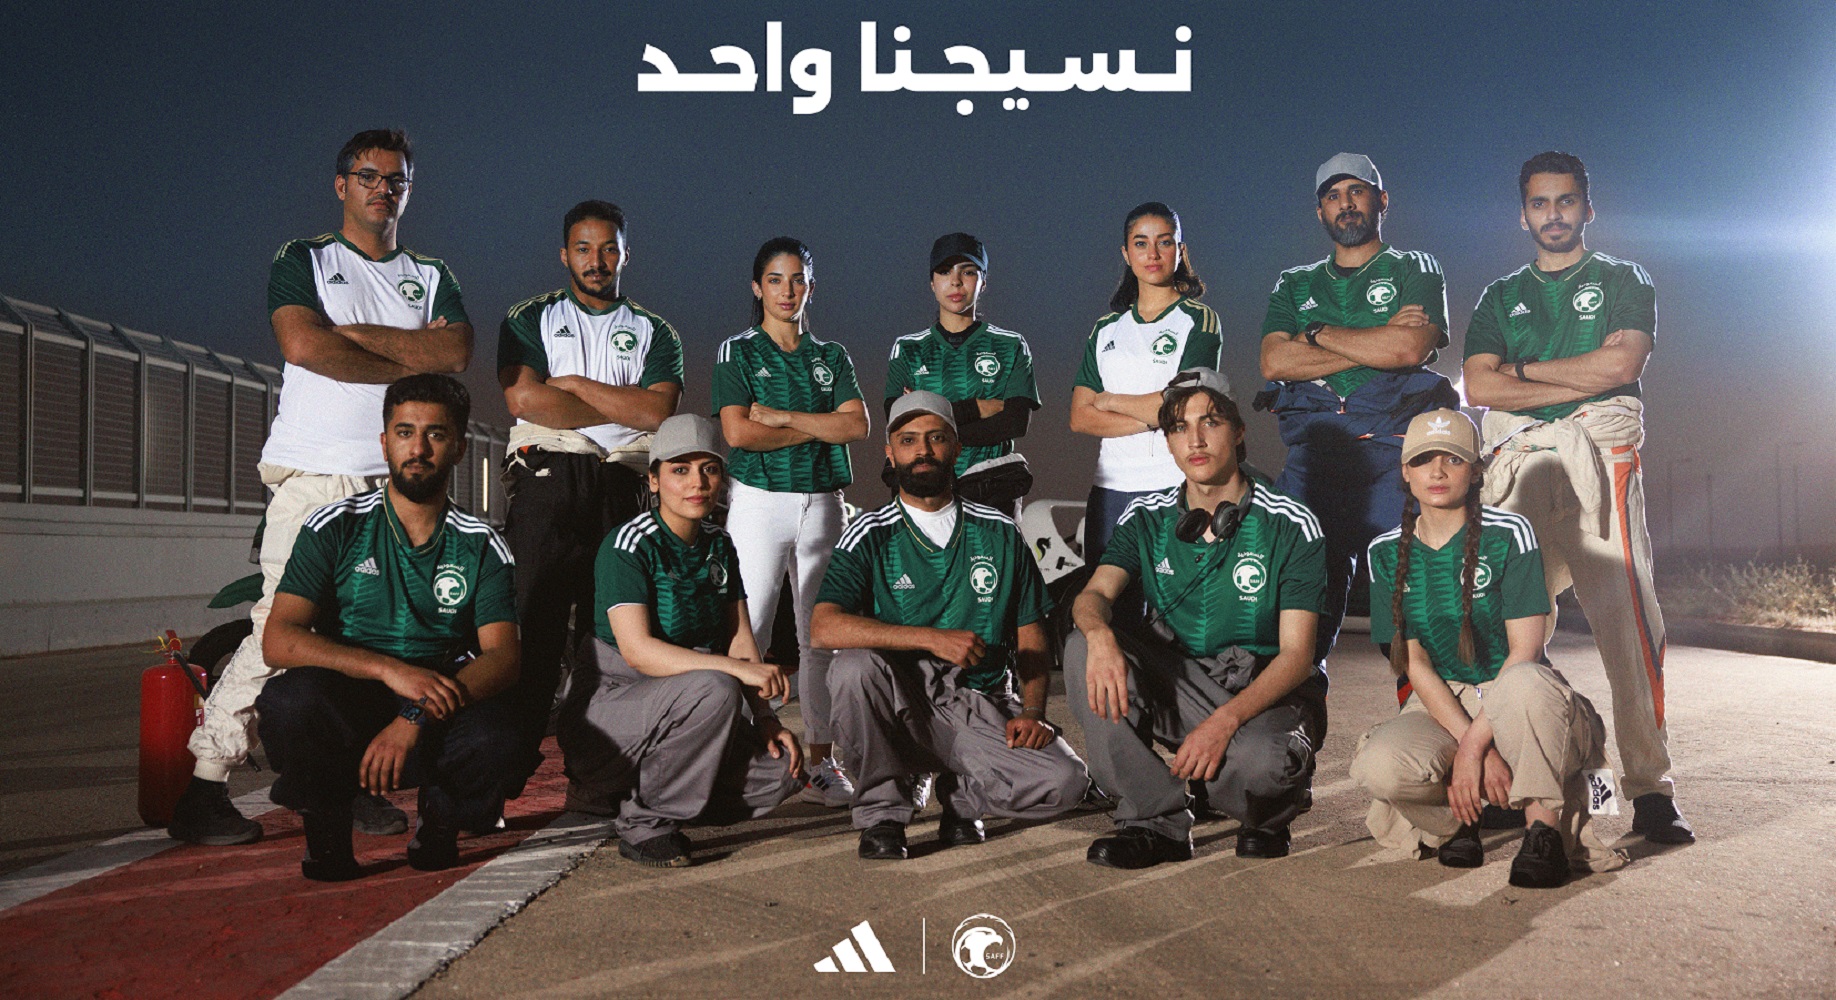 Adidas and Havas Middle East ‘Weaved As One’ Campaign